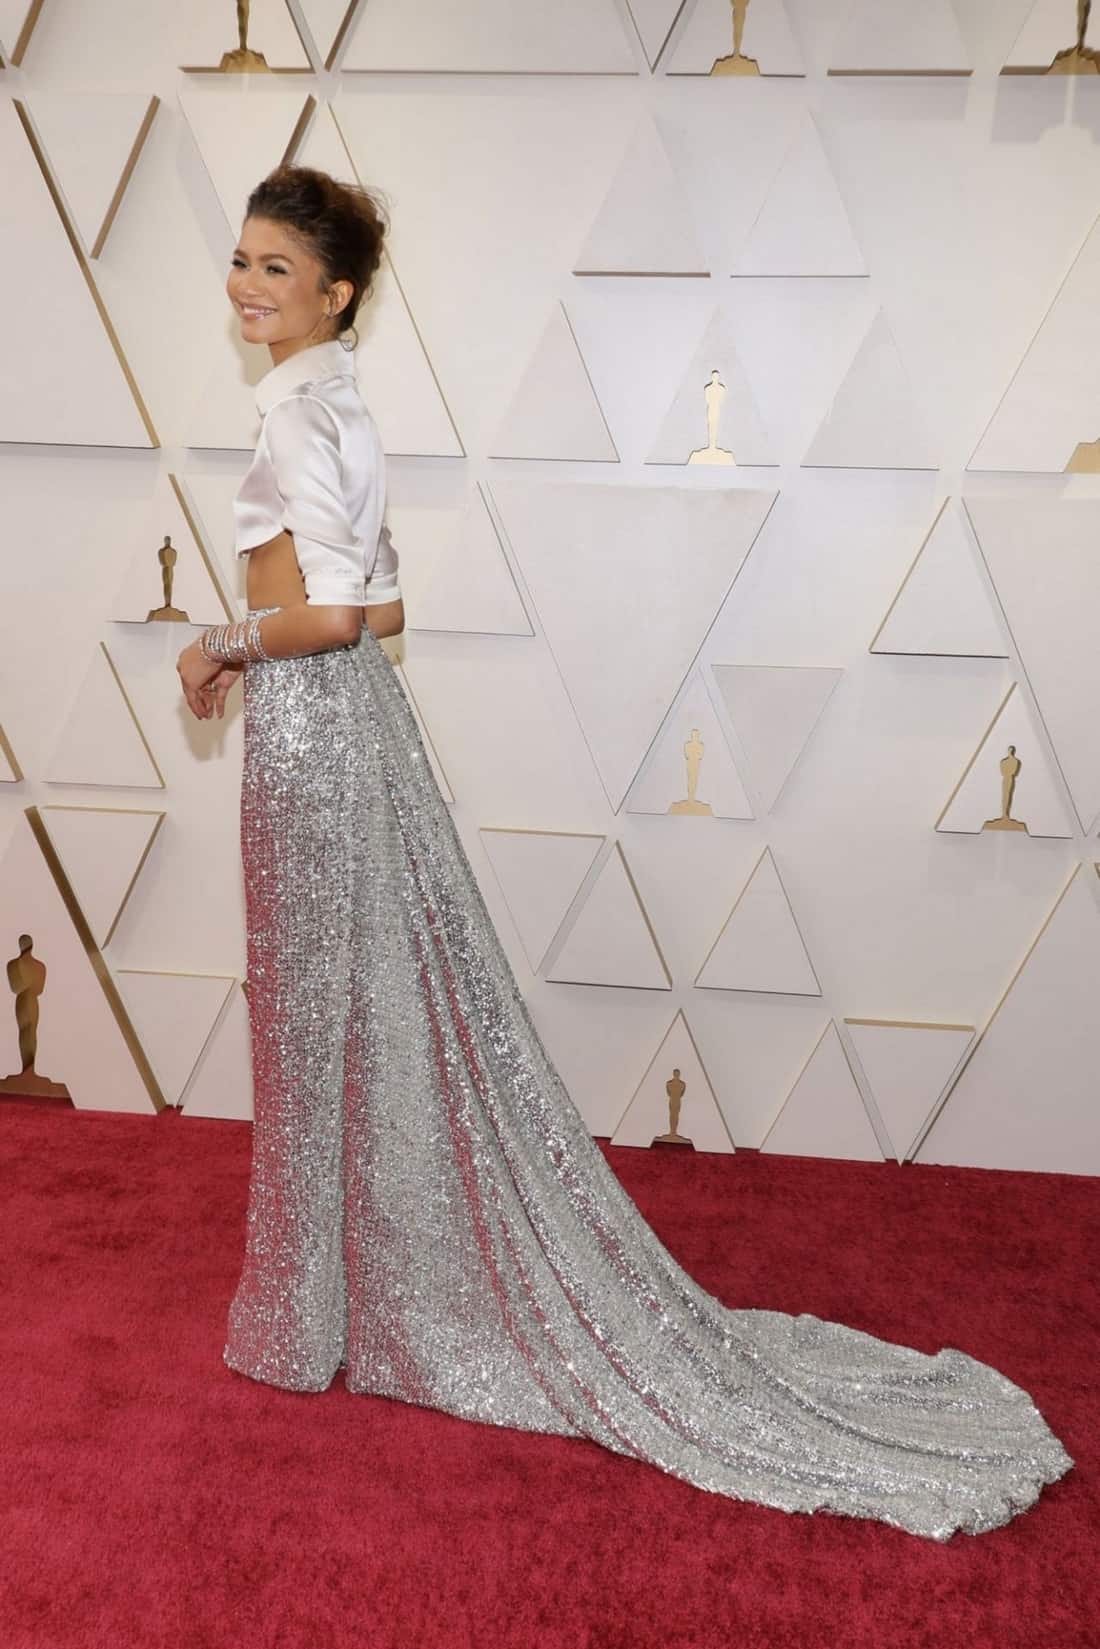 Zendaya Wows in a White Crop Top and Silver Sequin Skirt at the 2022 Oscars